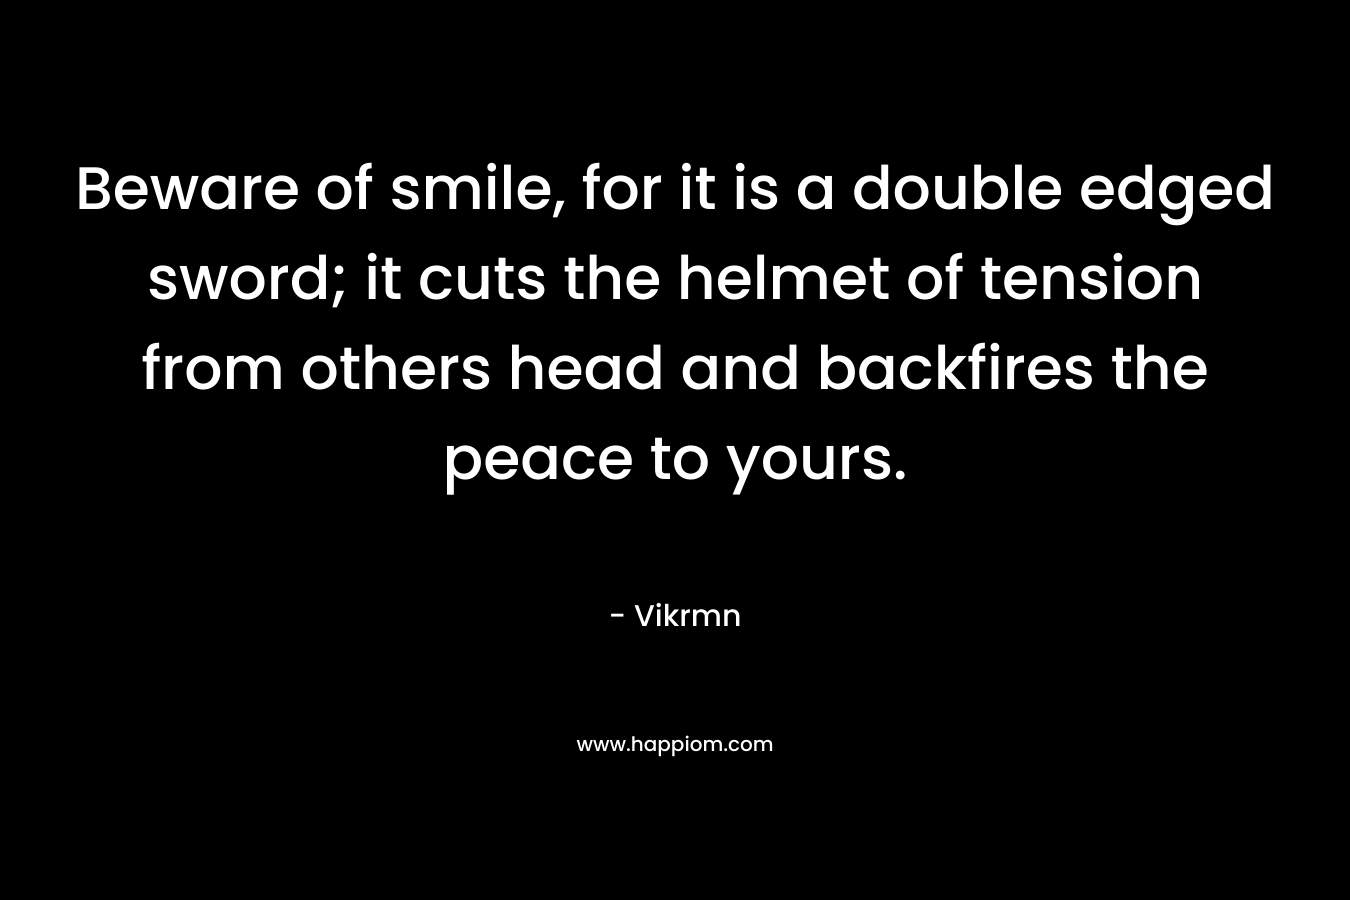 Beware of smile, for it is a double edged sword; it cuts the helmet of tension from others head and backfires the peace to yours. – Vikrmn